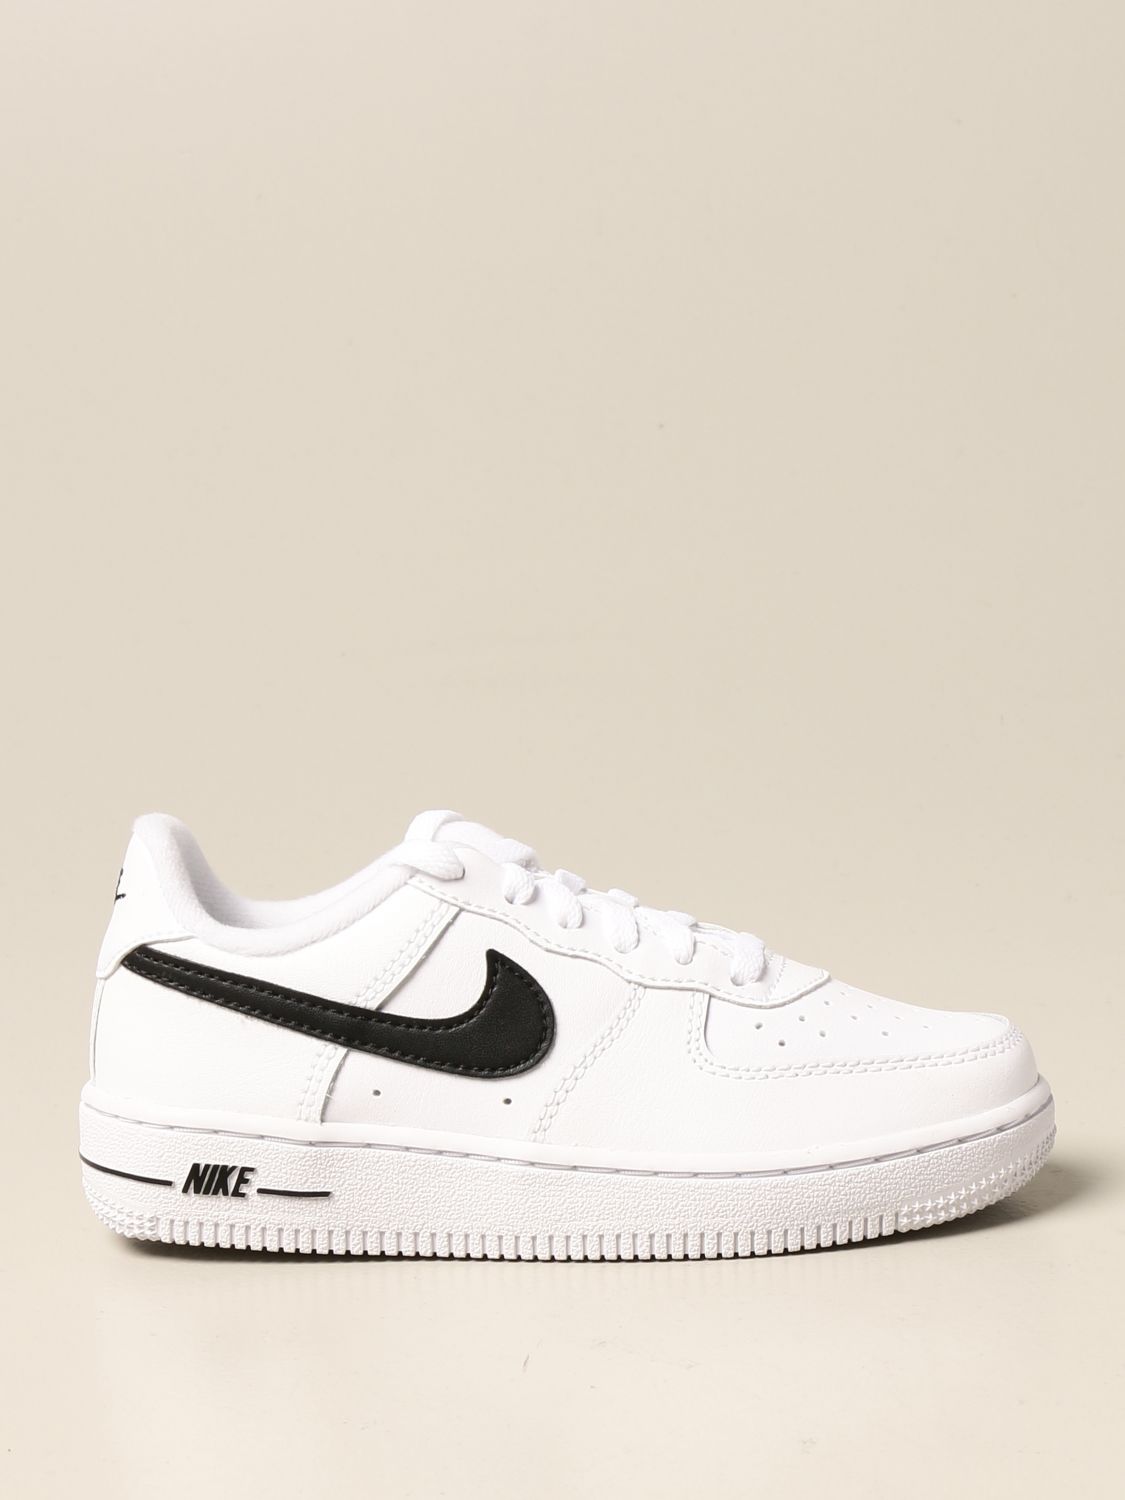 Air sneakers in leather - White | Nike shoes online on GIGLIO.COM